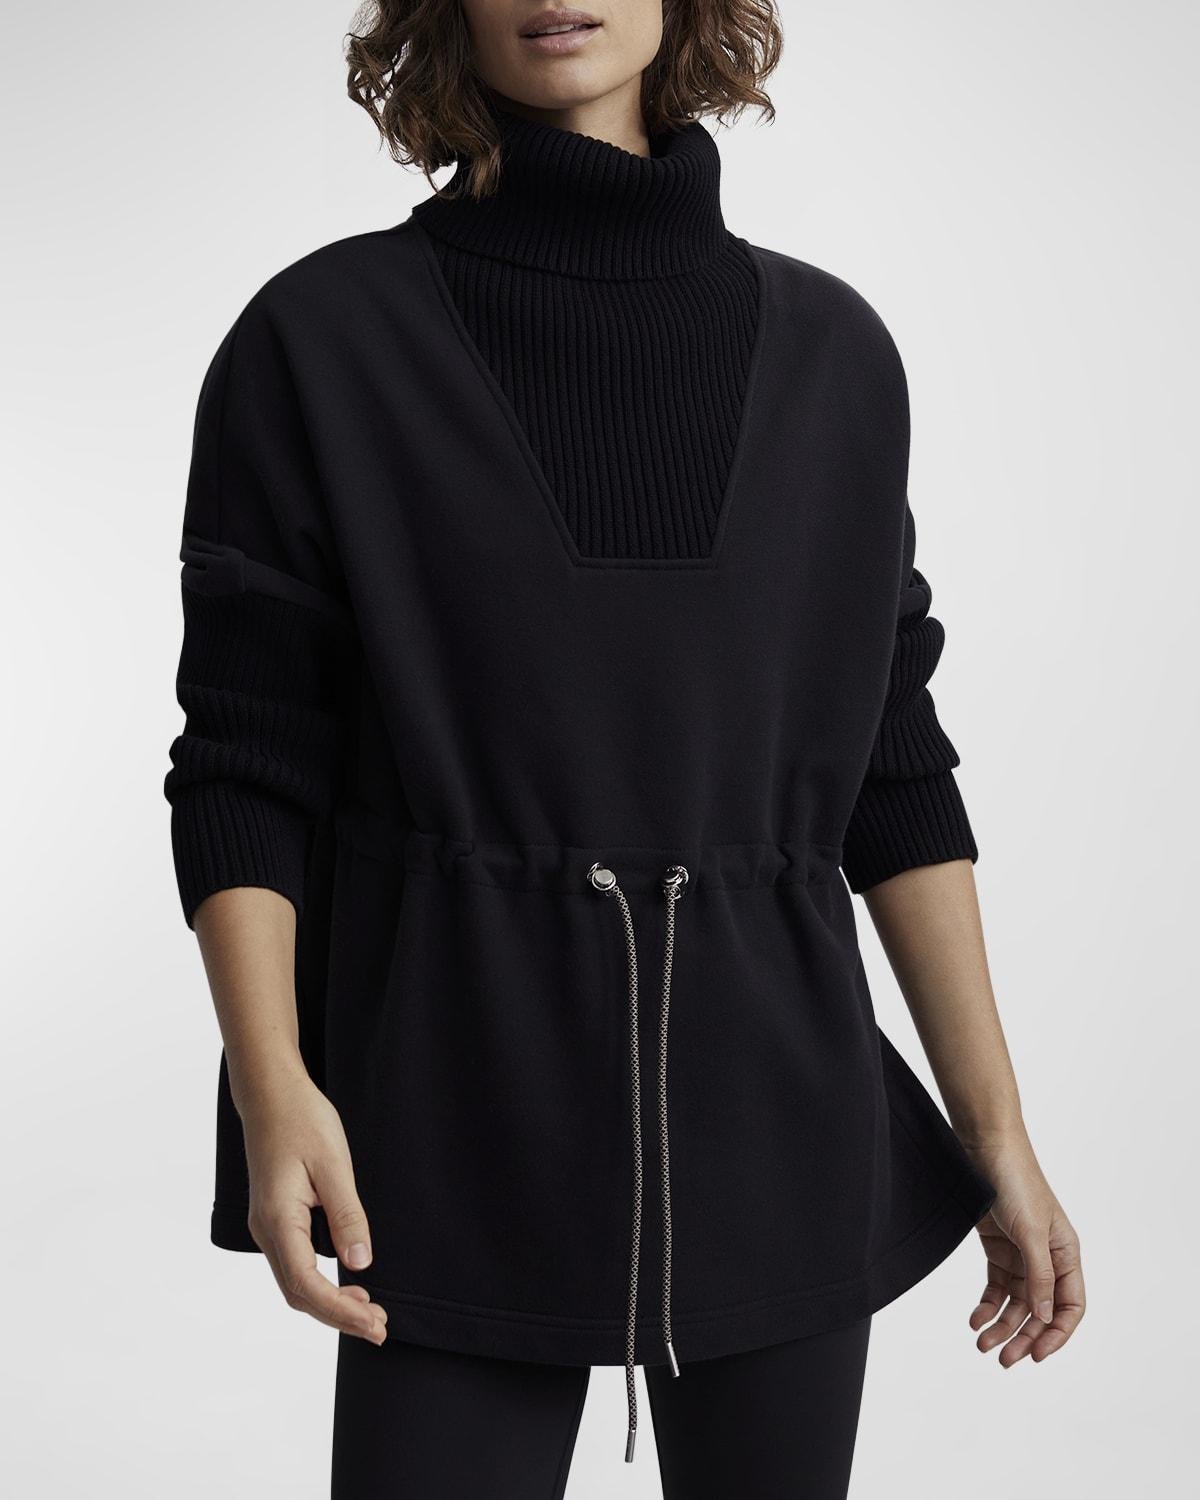 Cavello Longline Turtleneck Sweater by VARLEY